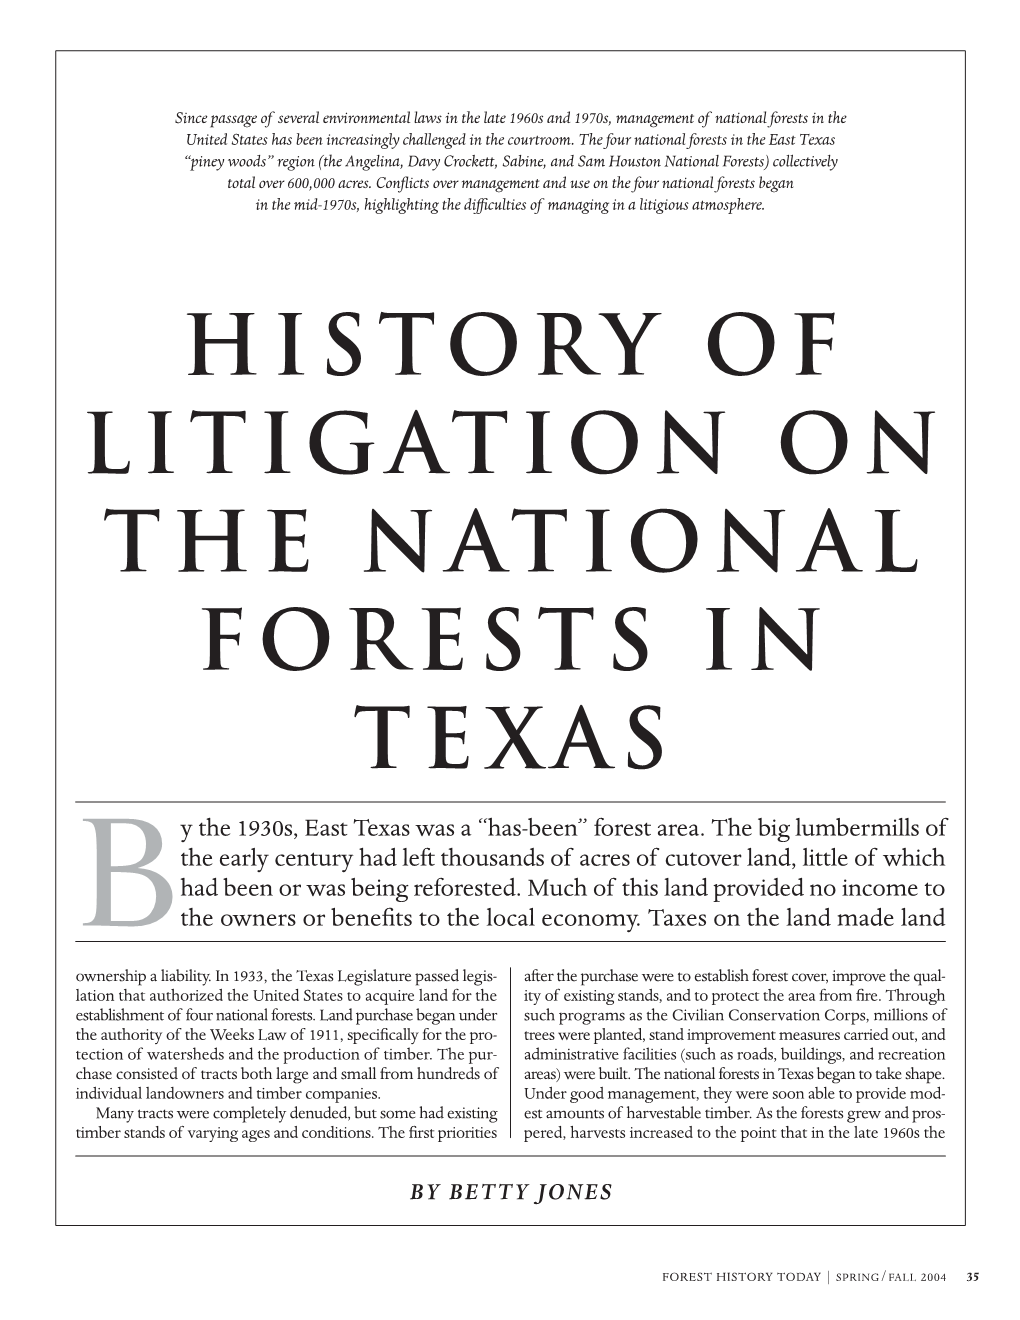 History of Litigation on the National Forests in Texas